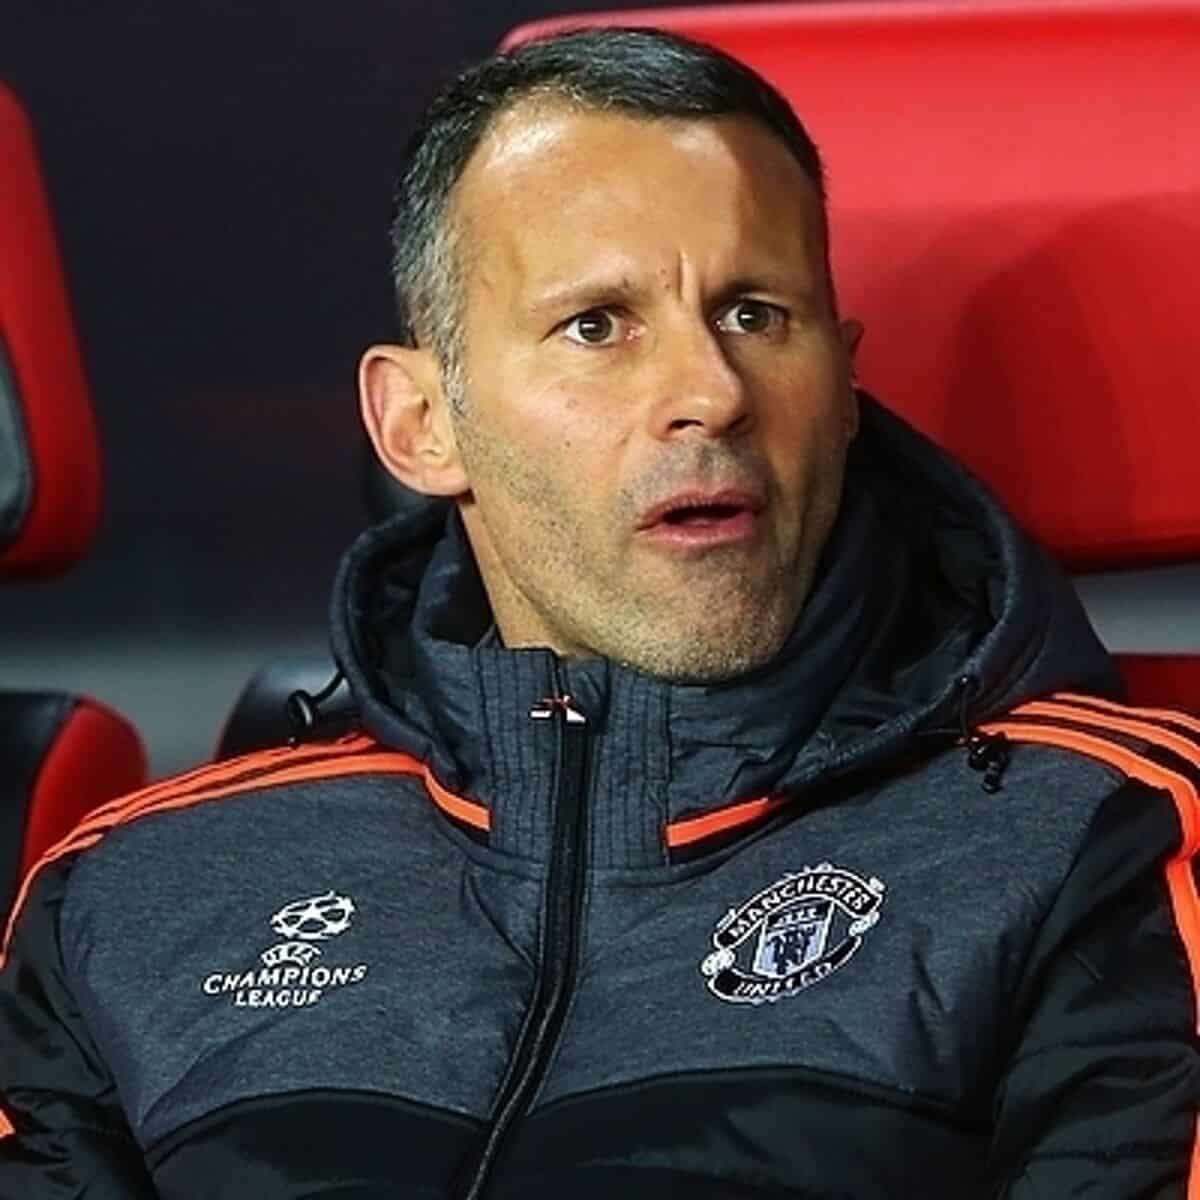 Ryan Giggs net worth in Football / Soccer category